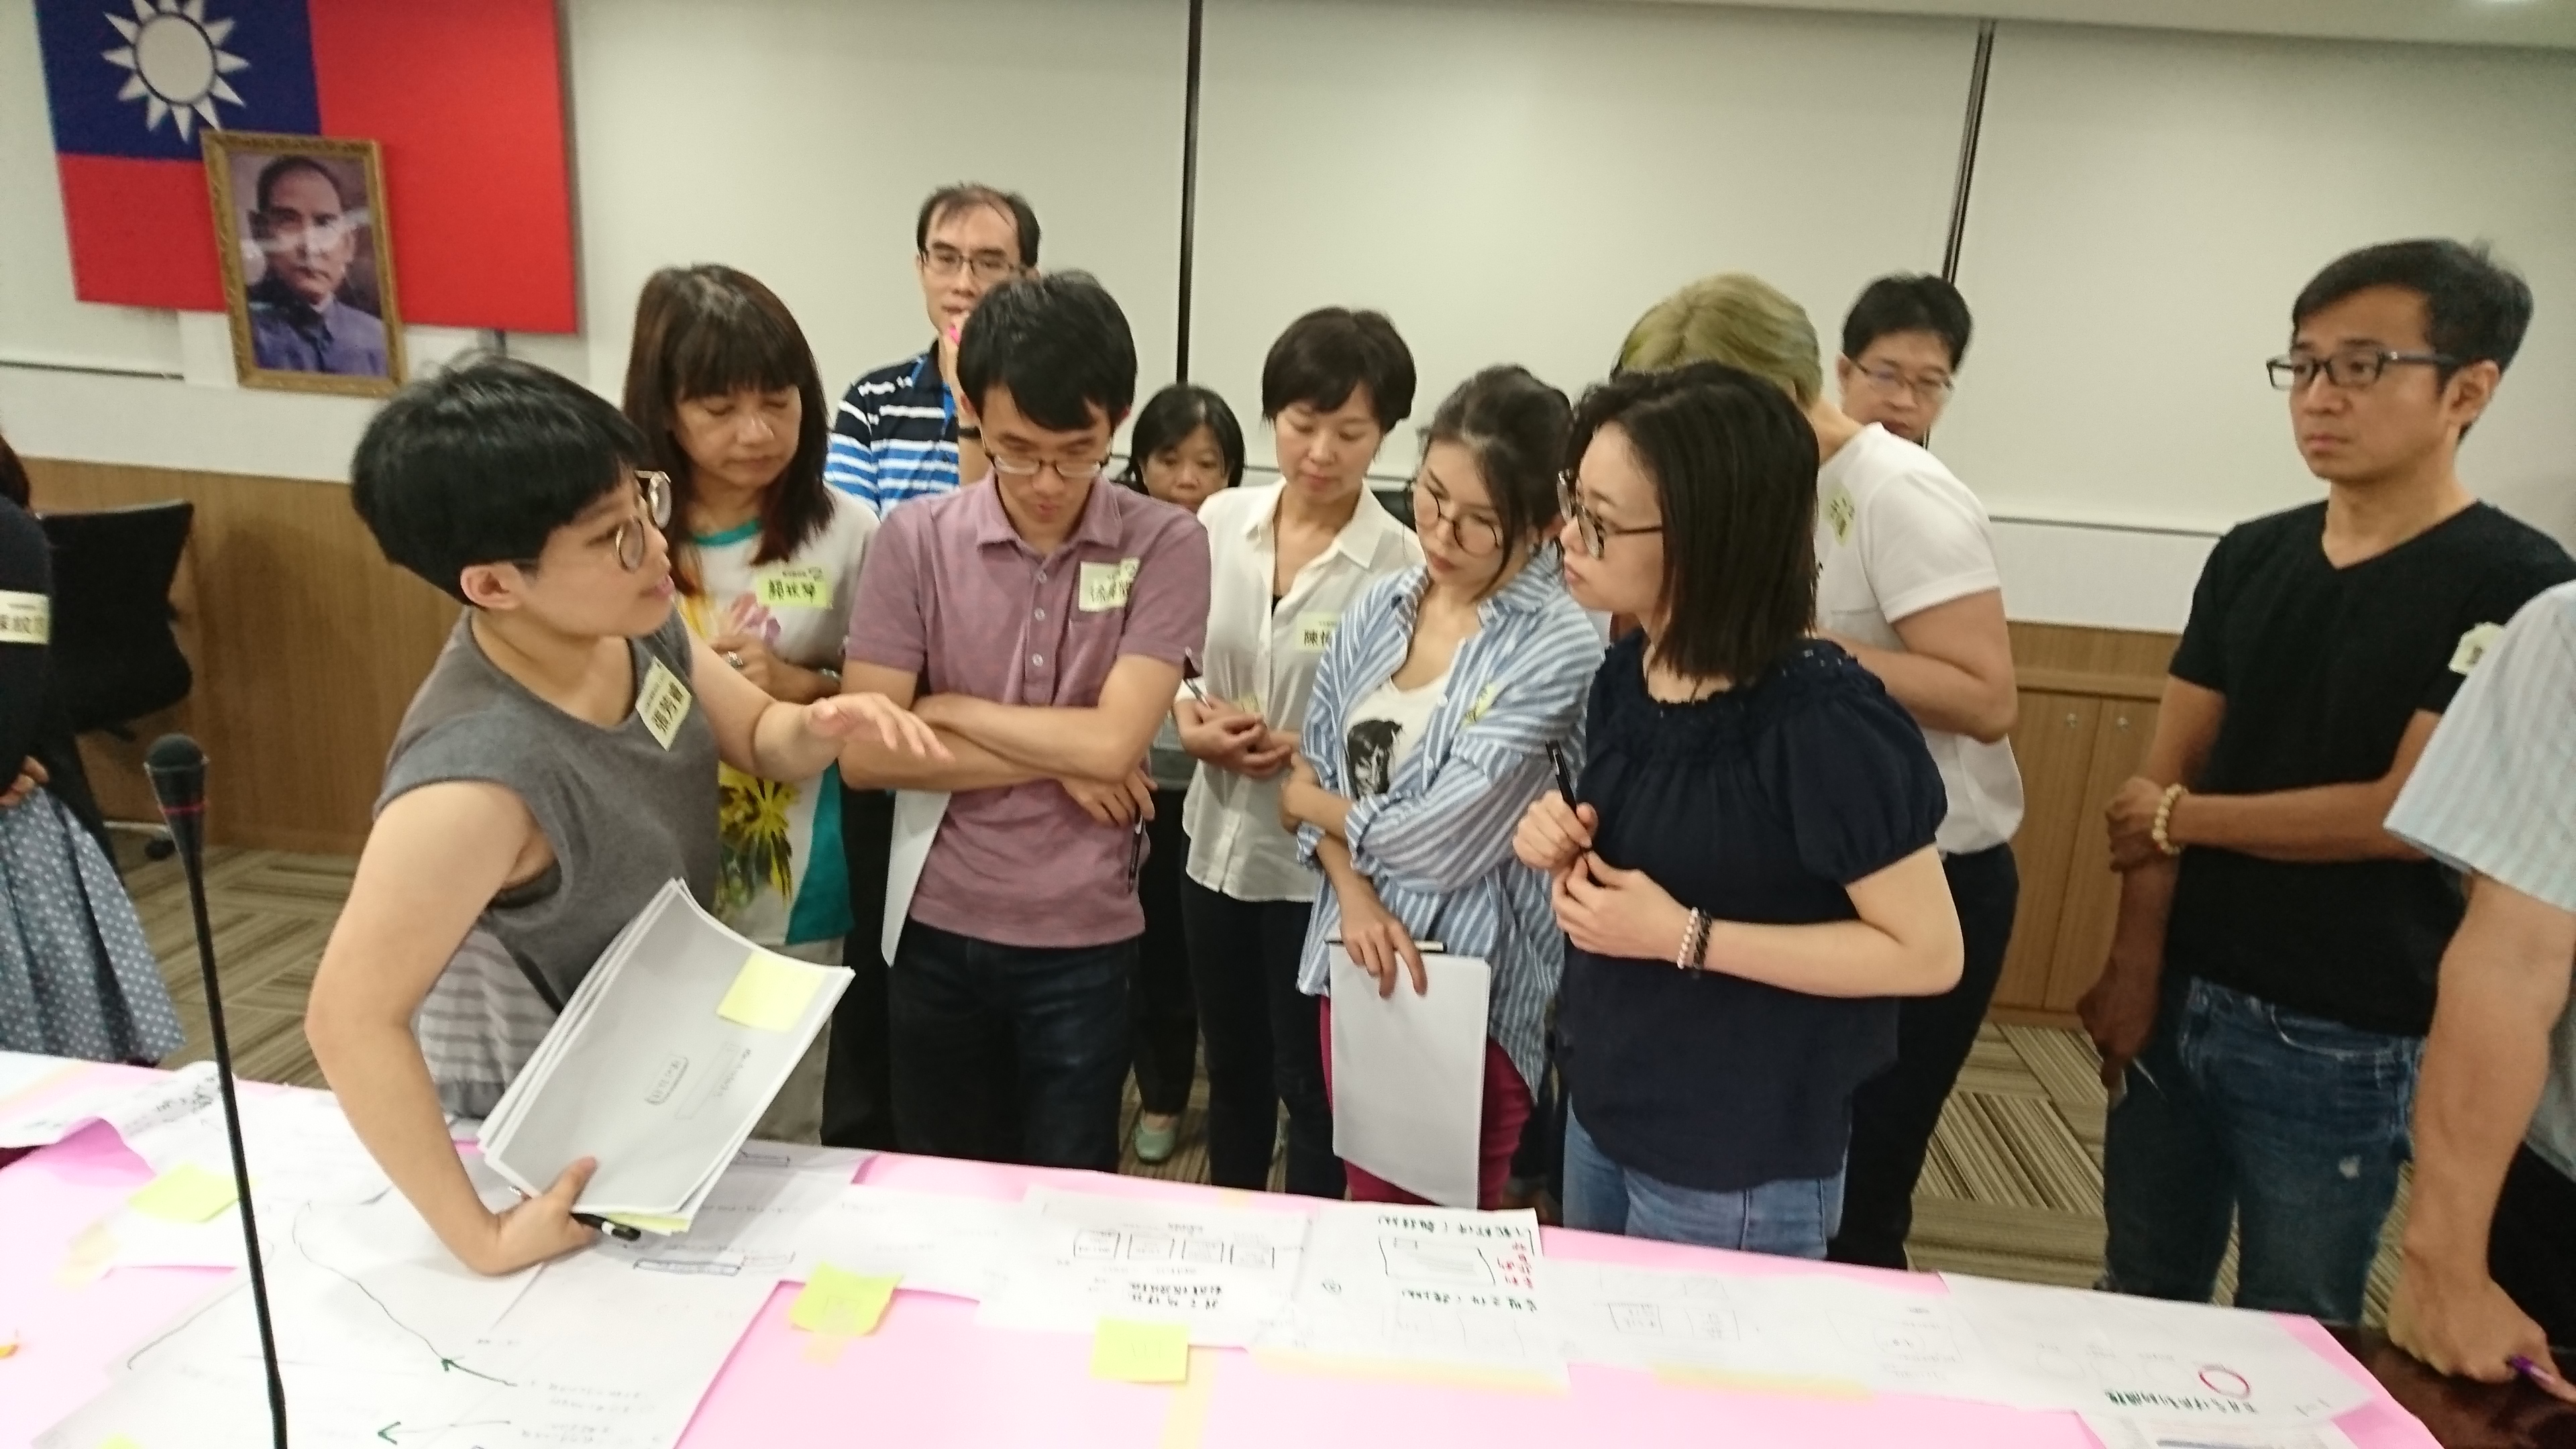 Zhang Fangrui and participants explained how to participate